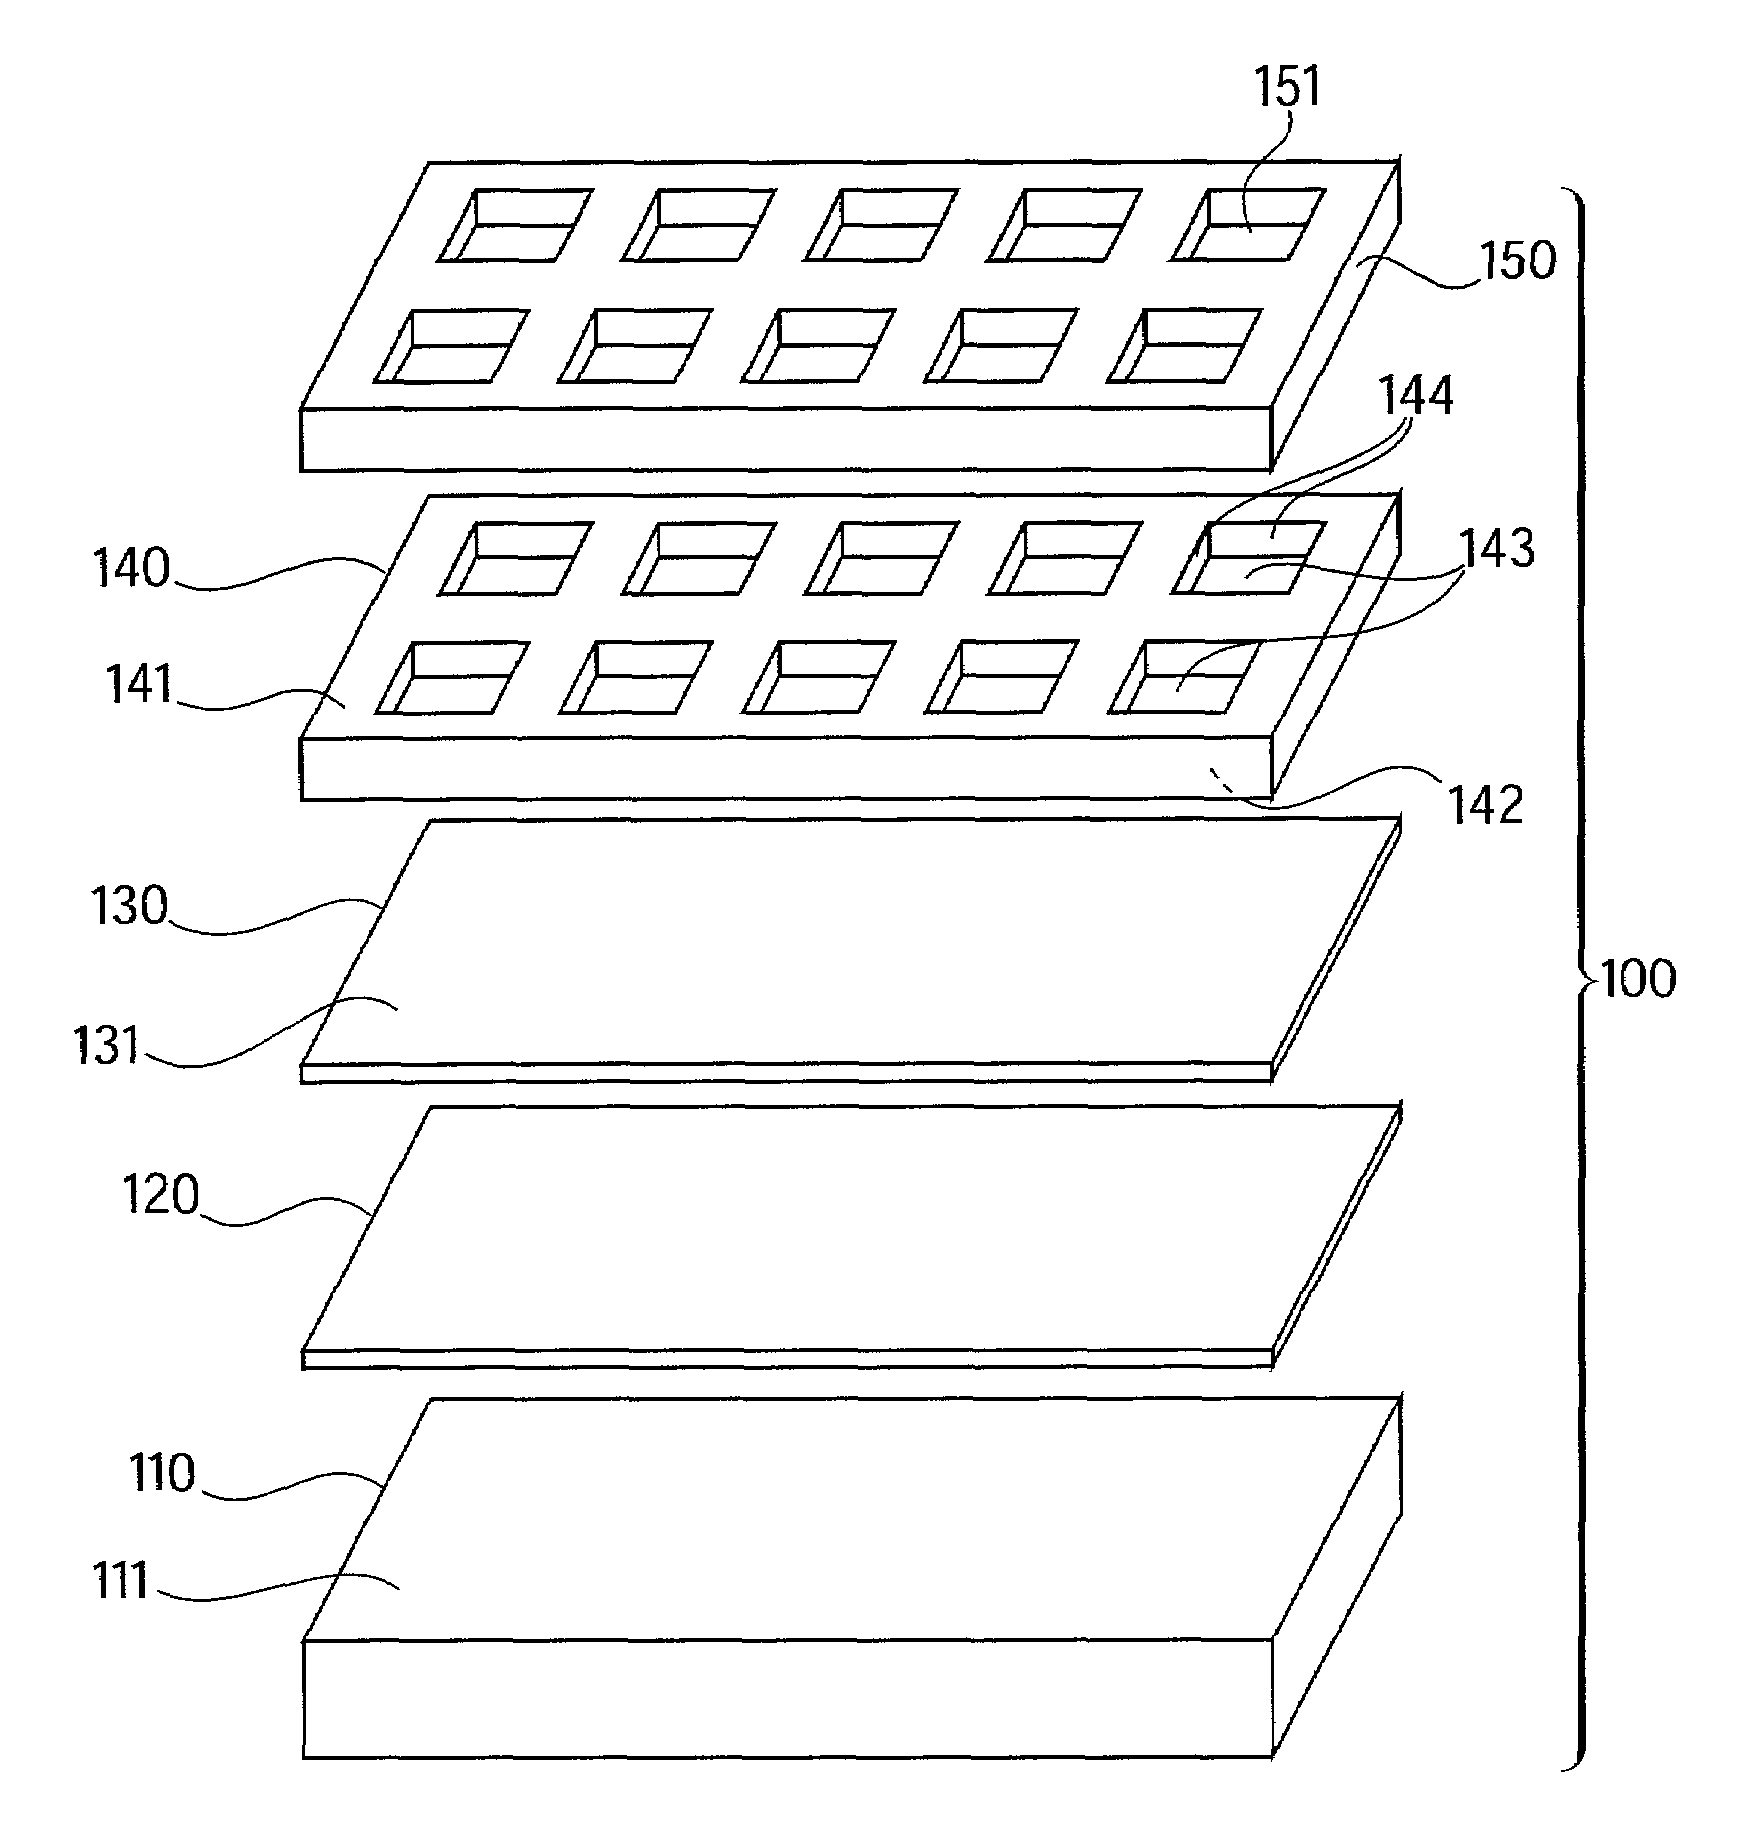 Methods for processing biological materials using peelable and resealable devices